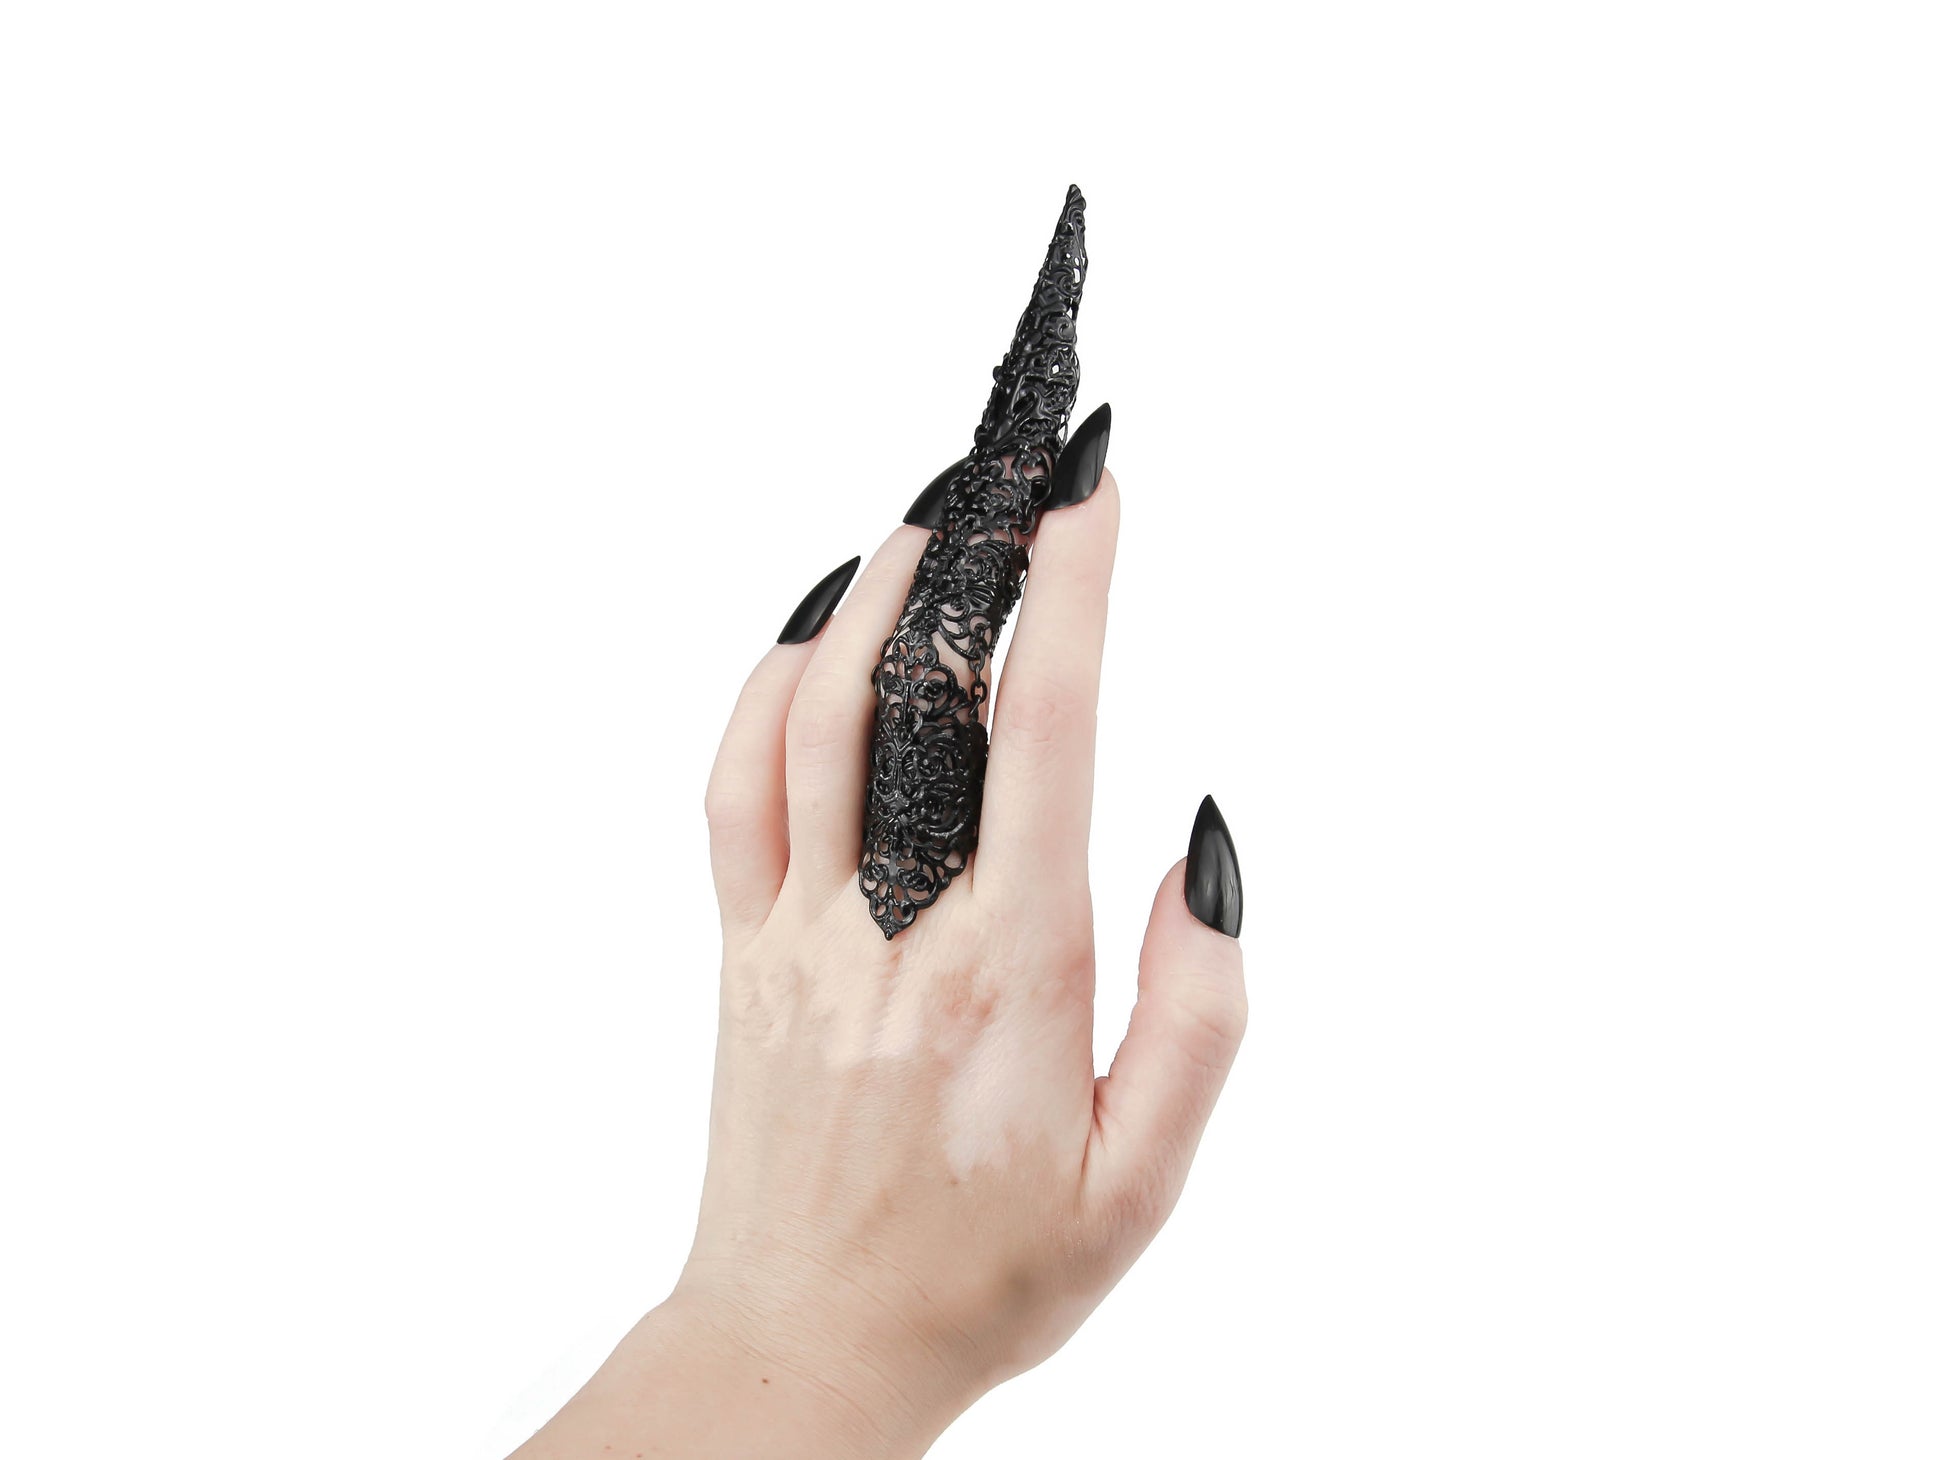 A single, detailed full-finger black claw ring with a sharp long nail claw adorns a hand, embodying the dark avant-garde flair of Myril Jewels. This piece is a bold testament to neo gothic style, making it a quintessential selection for those seeking gothic-chic or Halloween jewelry. Perfect as a statement accessory for drag queen performances, rave parties, or as a unique goth girlfriend gift